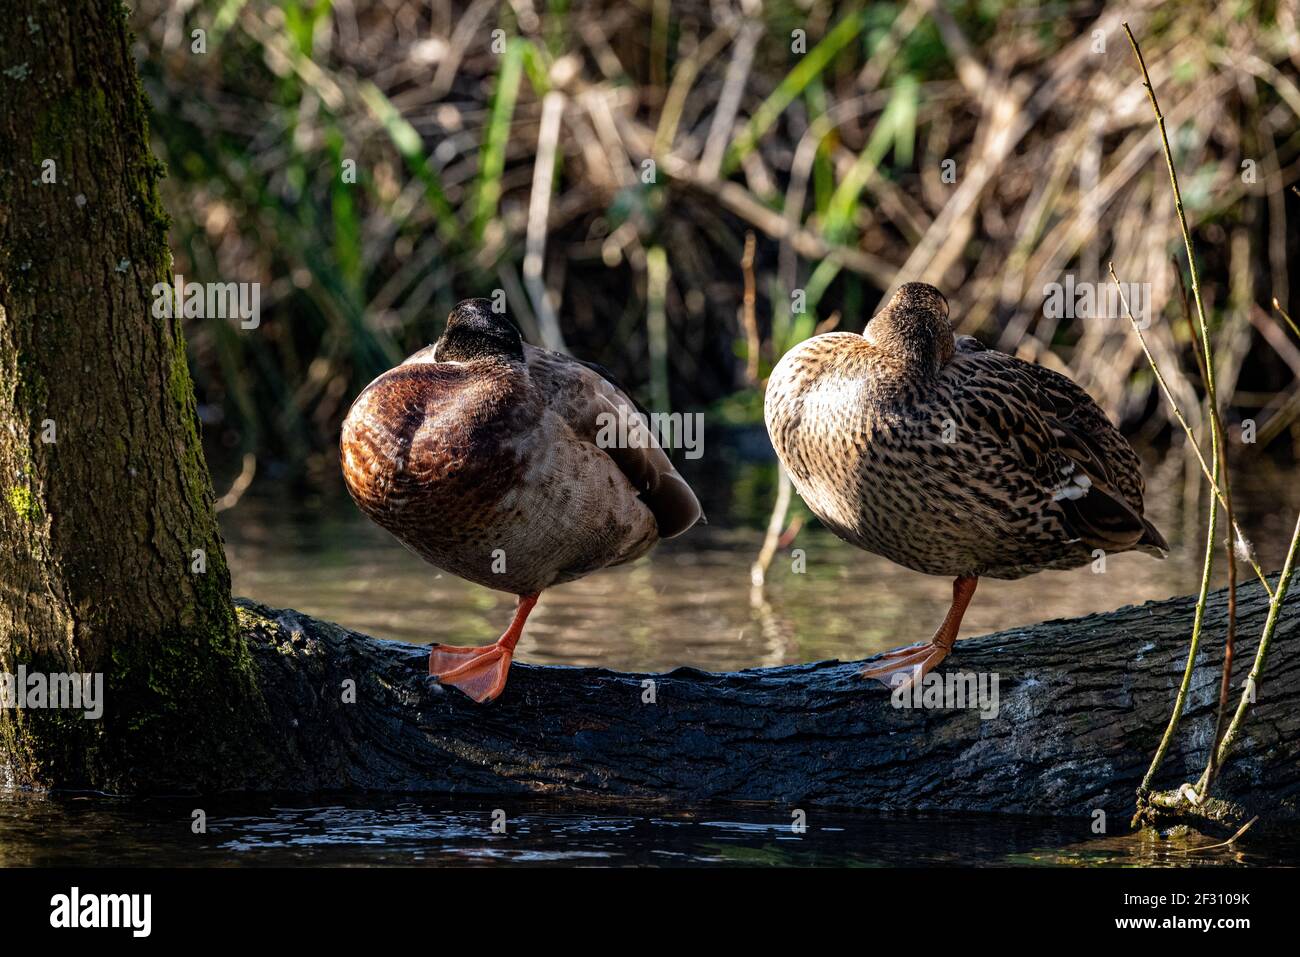 Two ducks asleep while standing on one leg, River Alre, Alresford, Hampshire, UK Stock Photo